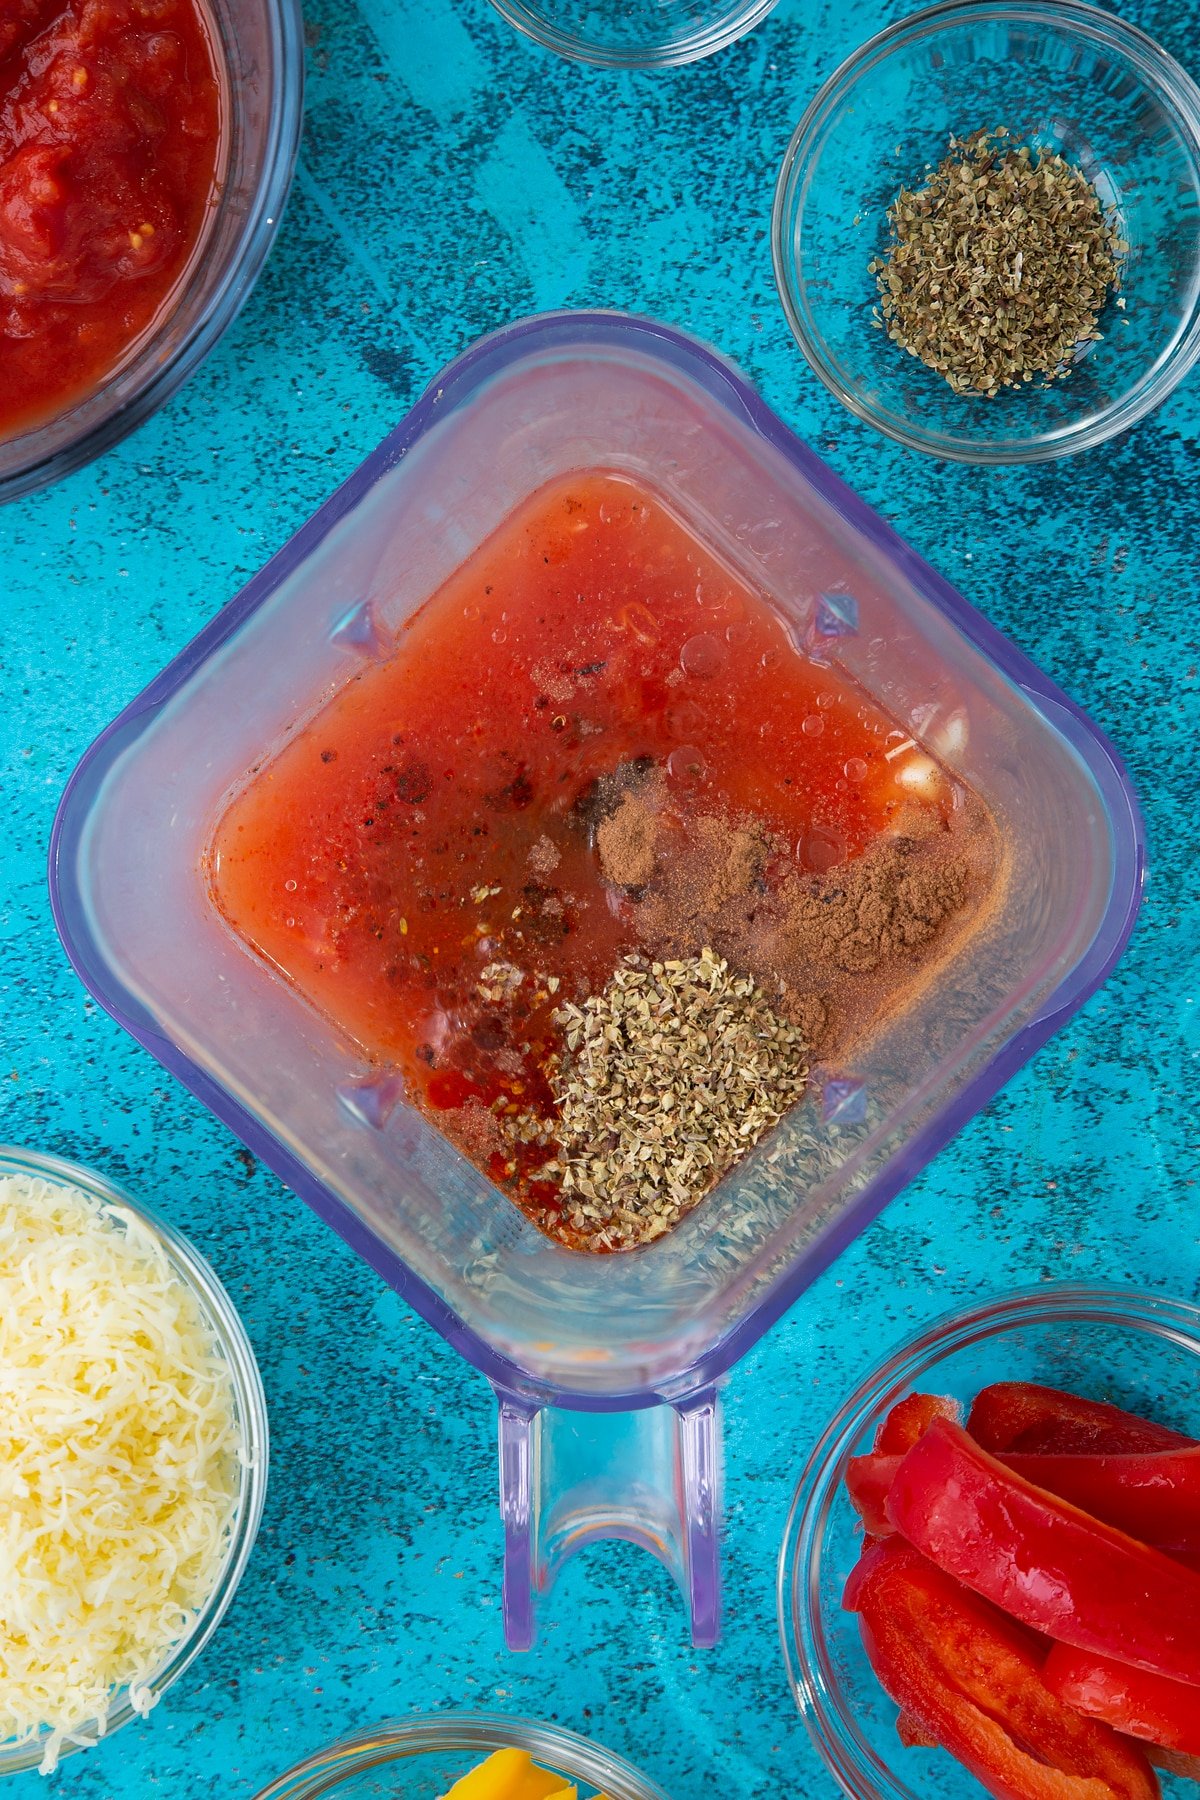 Water, tinned tomatoes, tomato puree, olive oil, vinegar and spices in a blender. Ingredients to make Quorn mince enchiladas surround the blender.